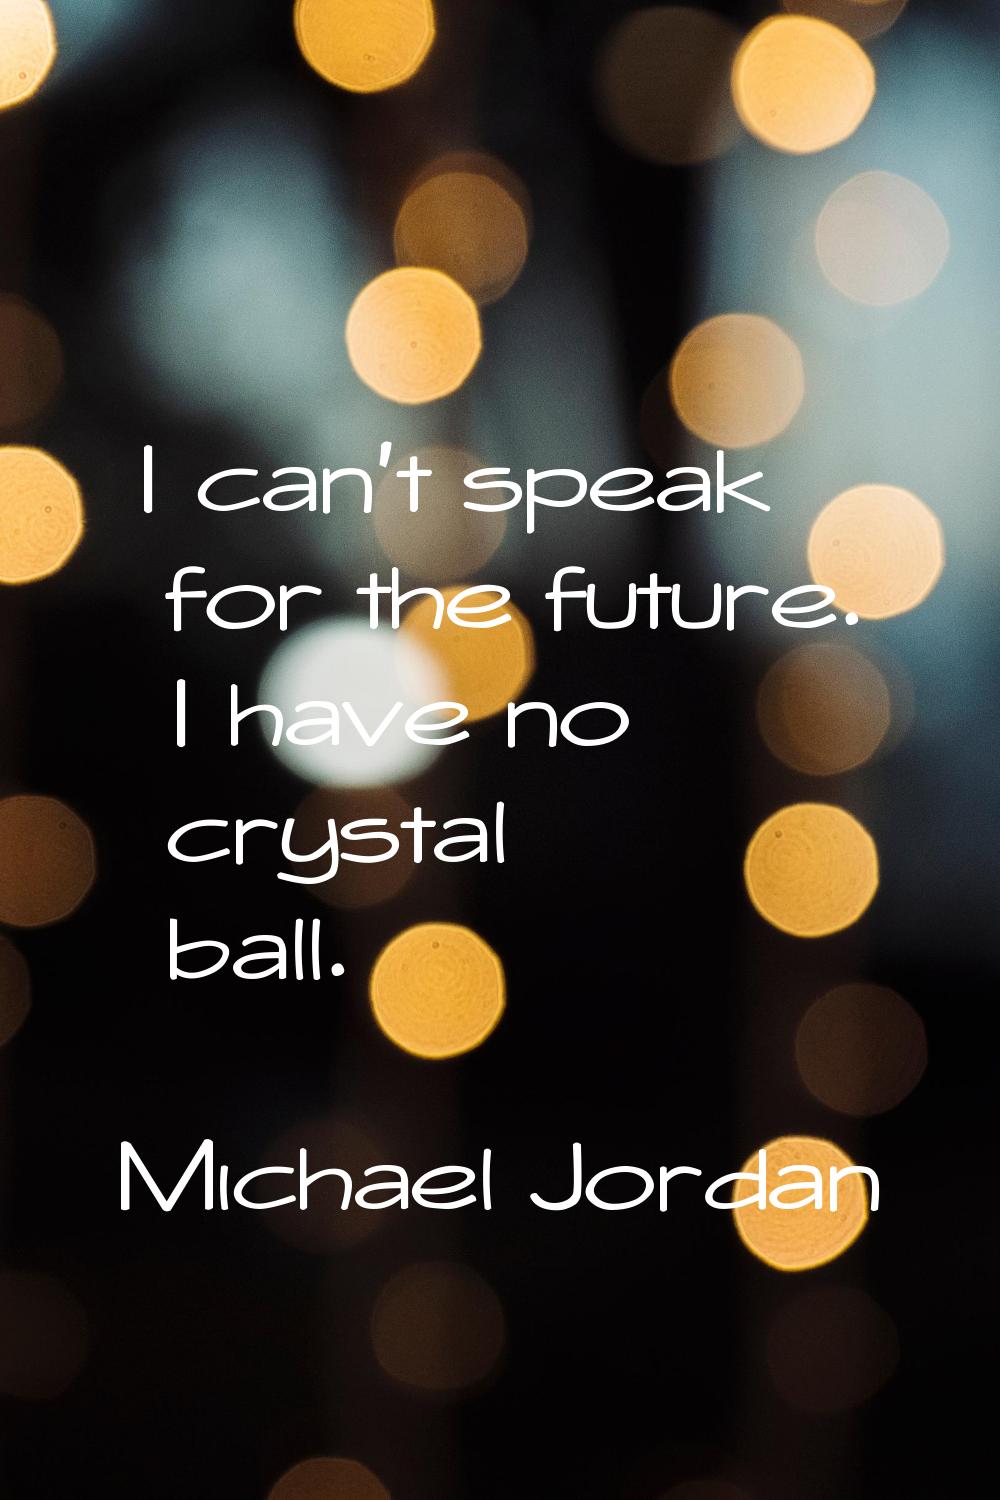 I can't speak for the future. I have no crystal ball.